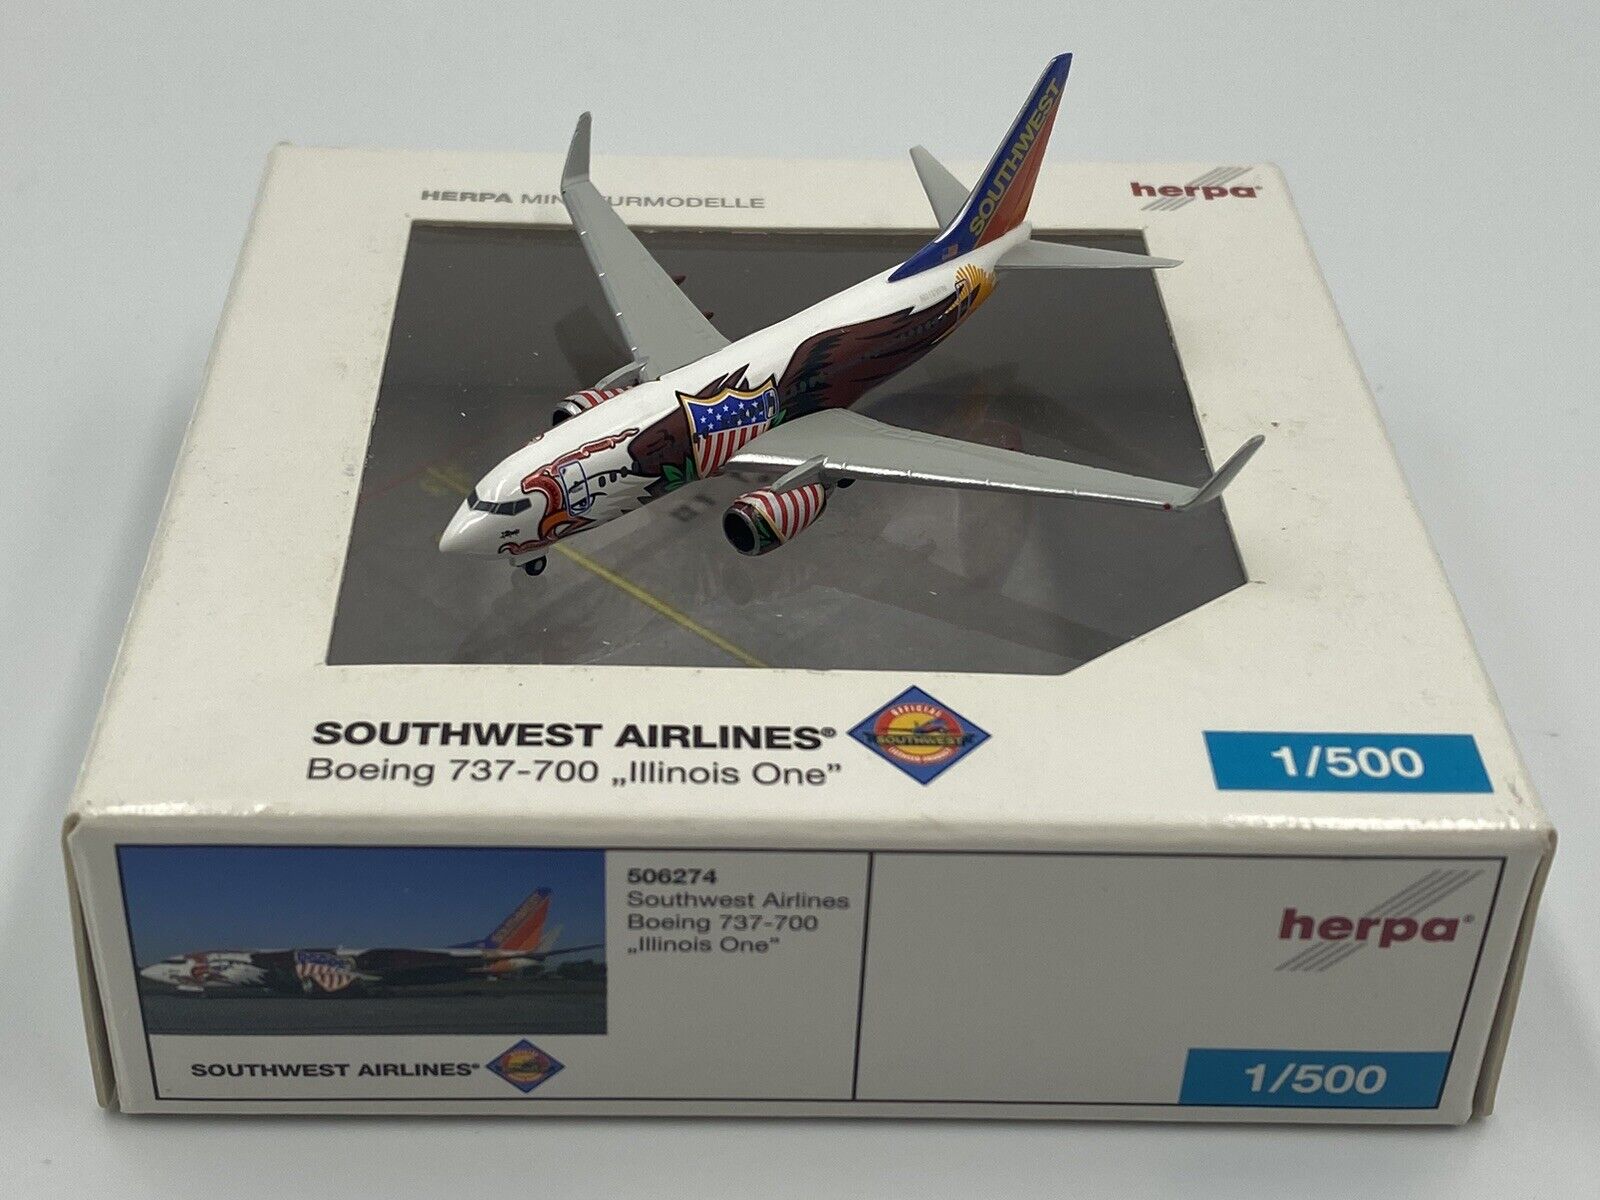 HERPA WINGS (506274) 1:500 SOUTHWEST AIRLINES BOEING 737-700 ILLINOIS ONE BOXED